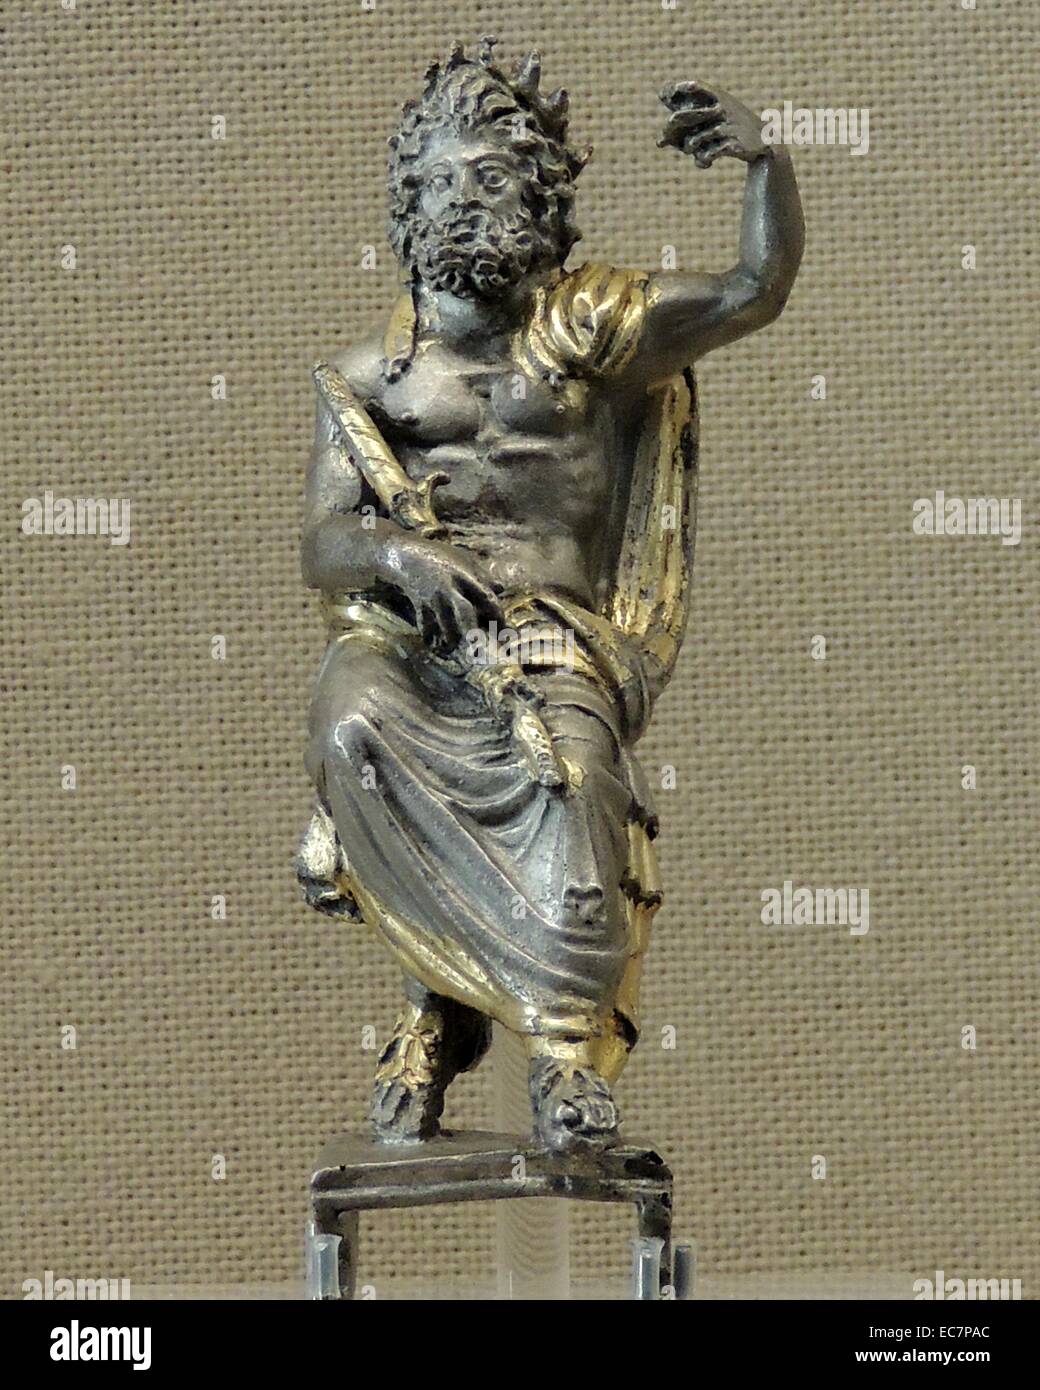 Zeus, patron of the Olympic Games.  These figures, two made of silver flanking a central bronze statuette, were inspired by the colossal gold and ivory statue of Zeus made by Pheidias for the god's temple at Olympia. Roman, AD1-80. Stock Photo